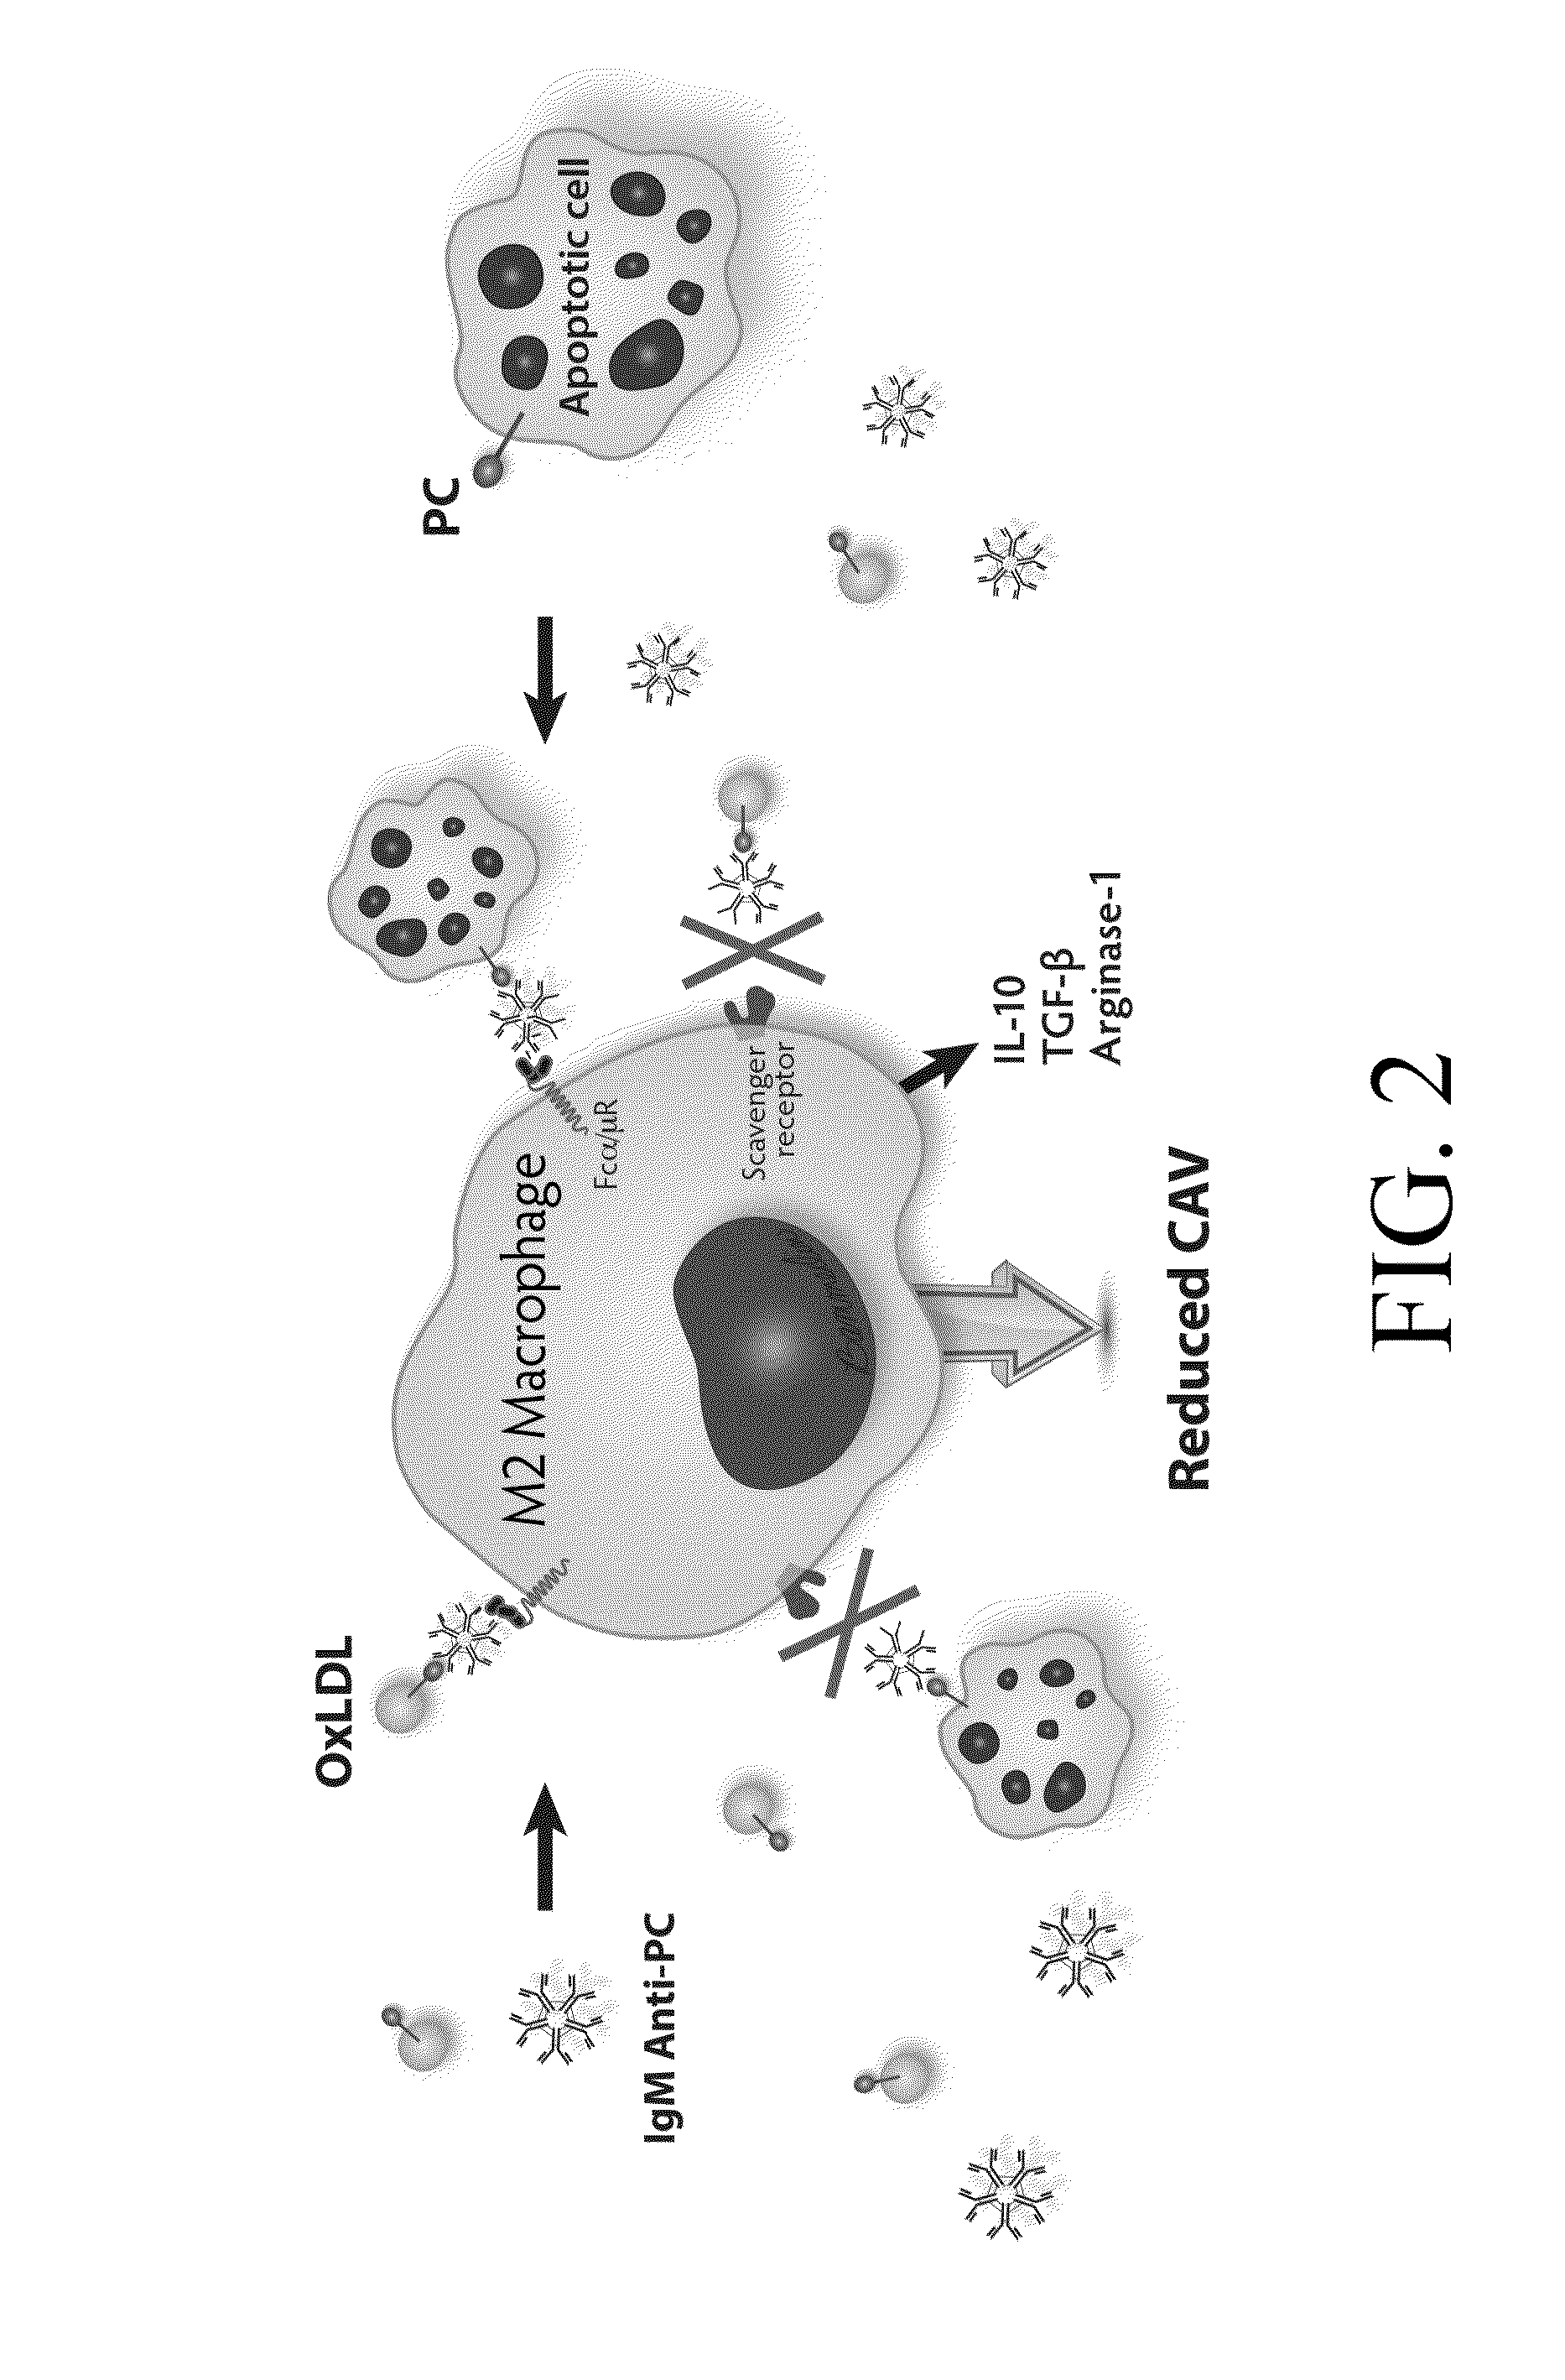 Substances, vaccines and methods for diagnosing and reducing incidences of transplant rejection